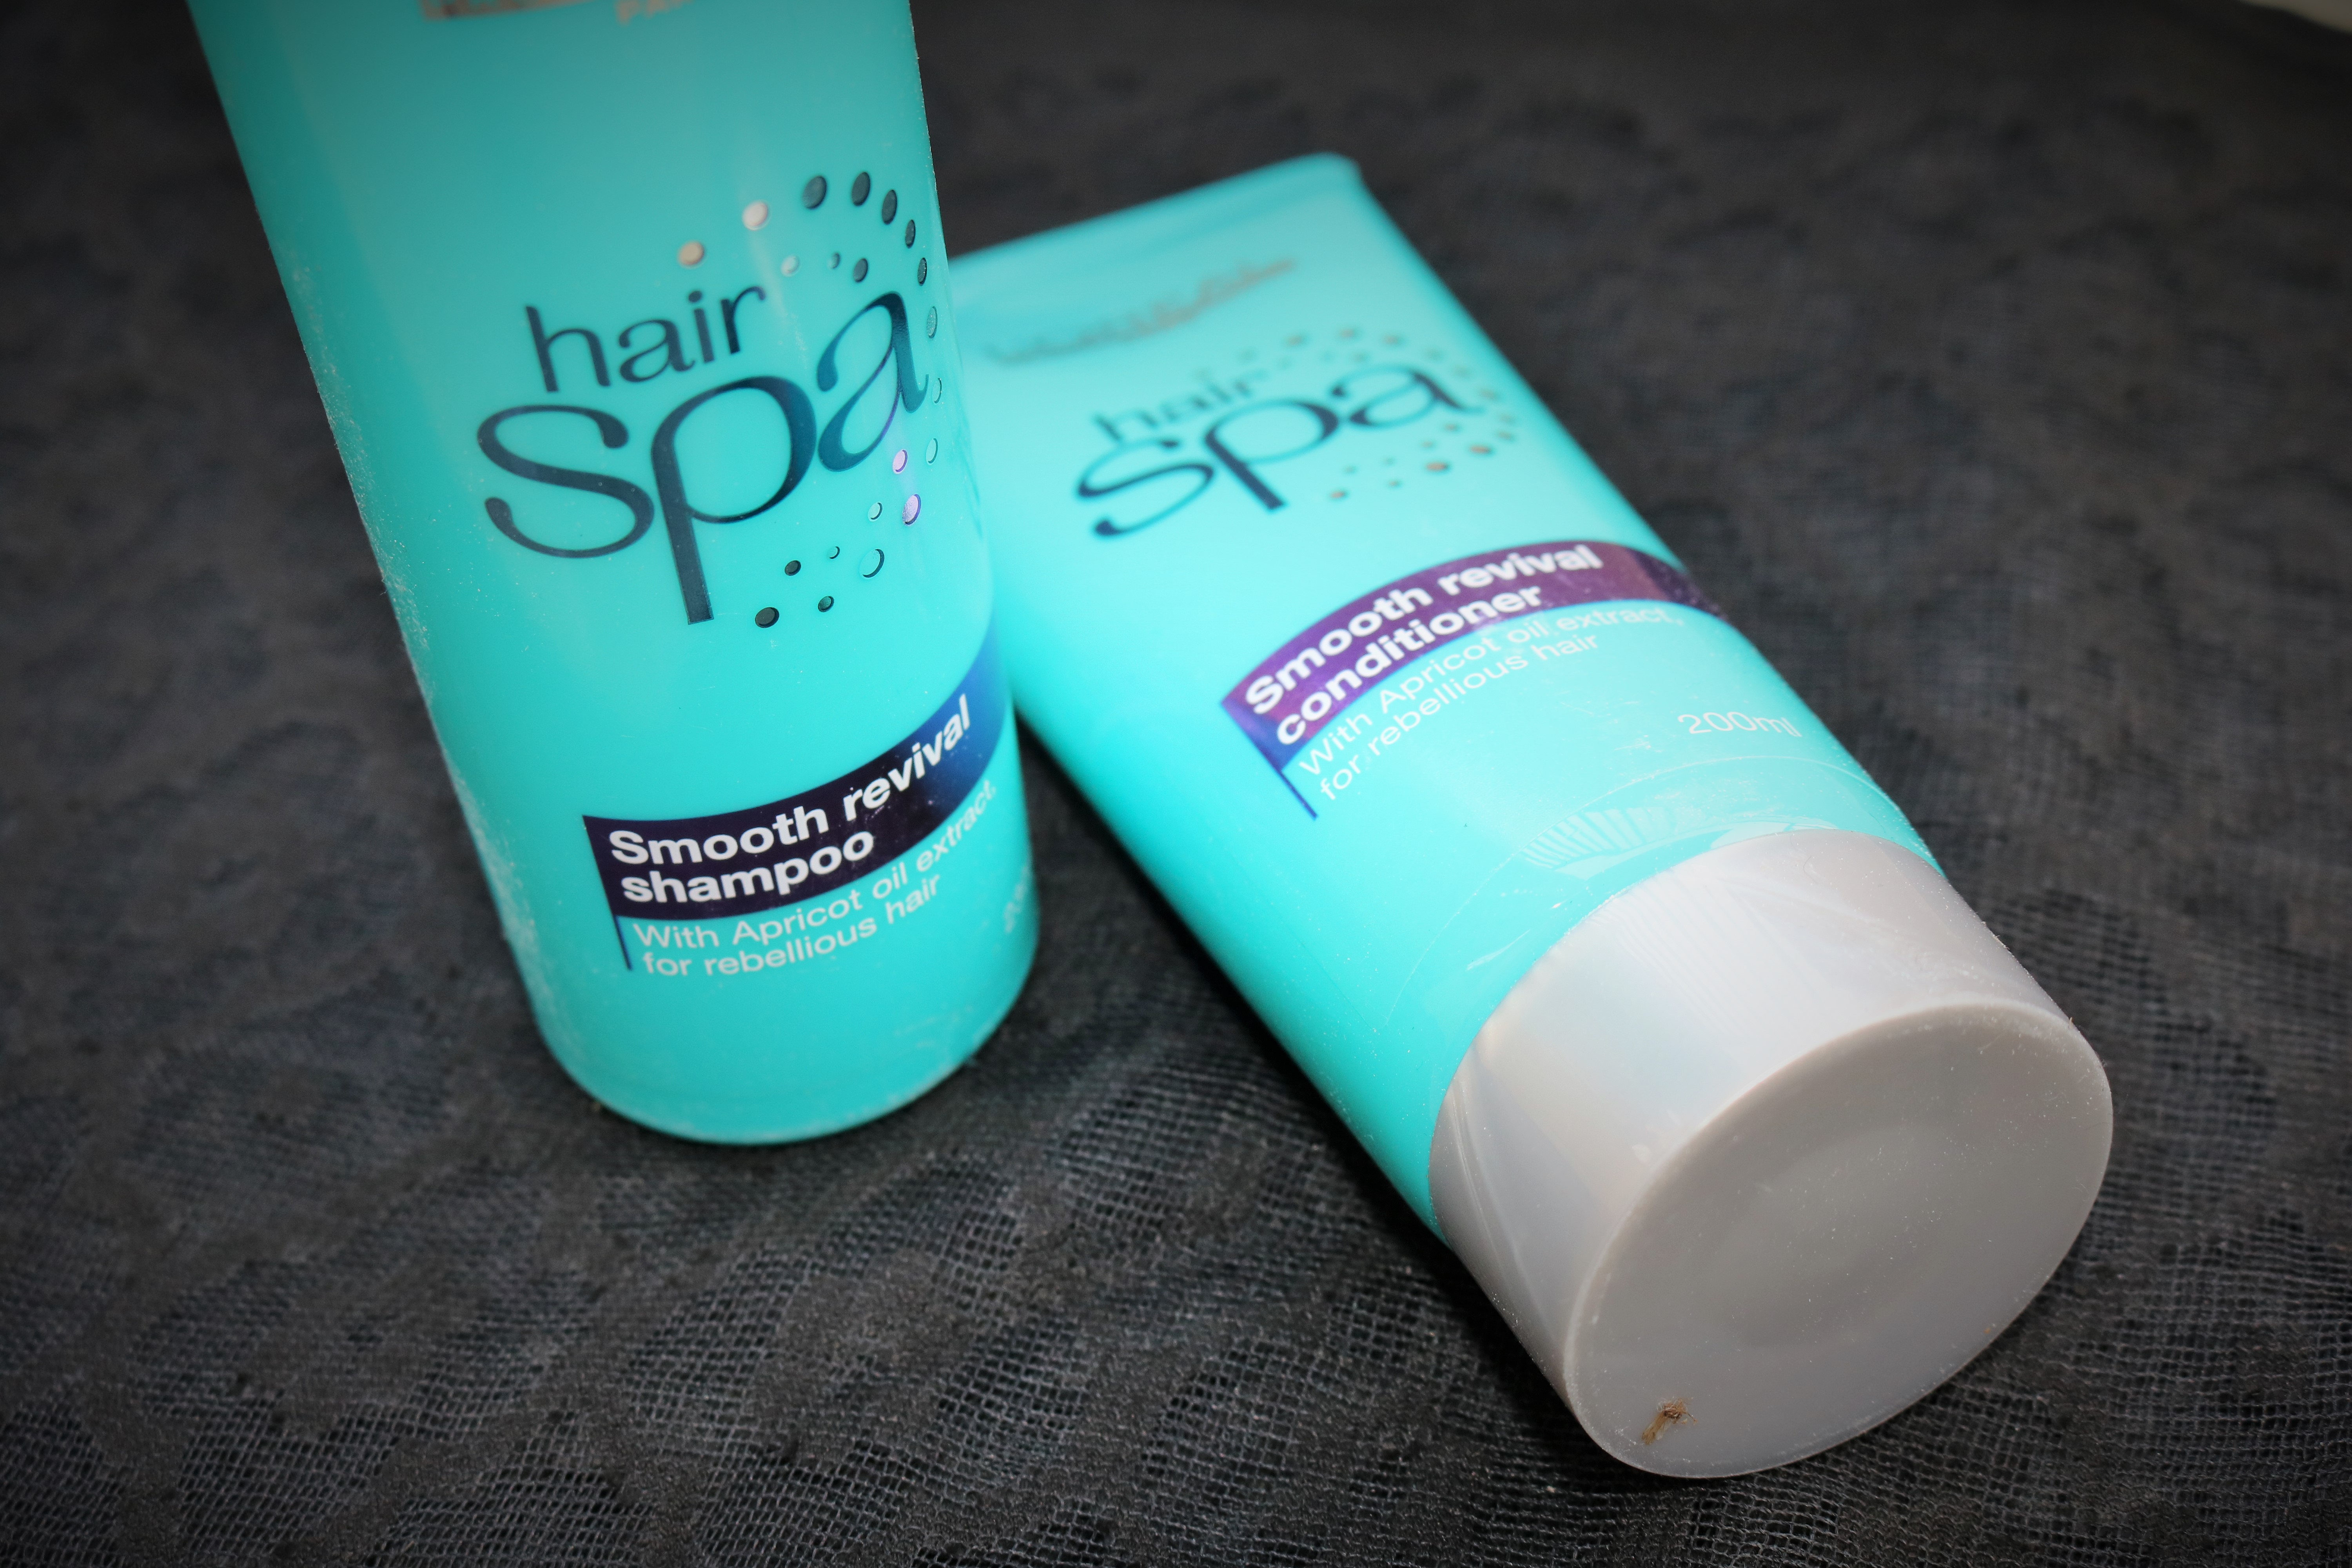 L'Oreal Professionnel Hair Spa Smooth Revival Shampoo and Conditioner